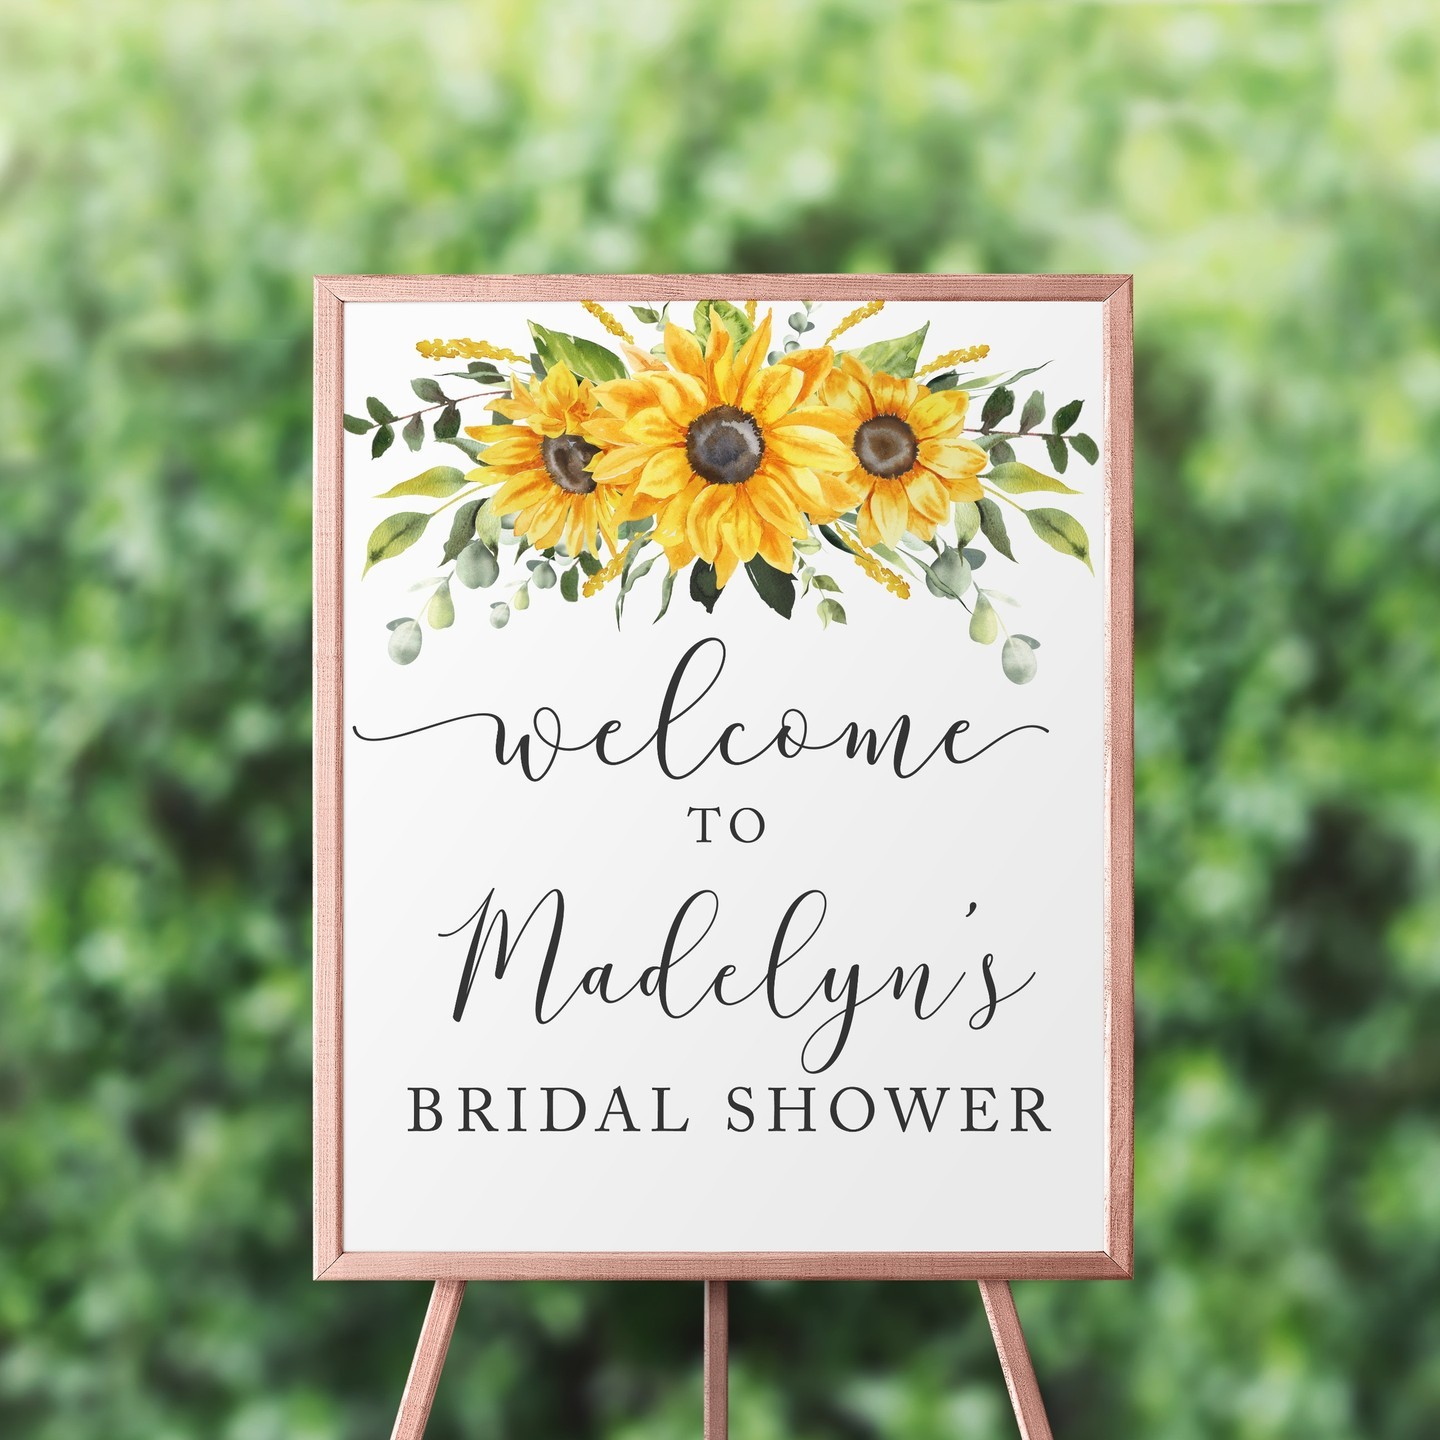 Sunflower Welcome Sign!⁠
Available in my Etsy shop as a digital item.⁠
.⁠
.⁠
.⁠
#racheldesignsshop #sunflowerbridalshower #sunflowerwelcomesign #sunflowershower #sunflowerweddingshower #printablesunflower